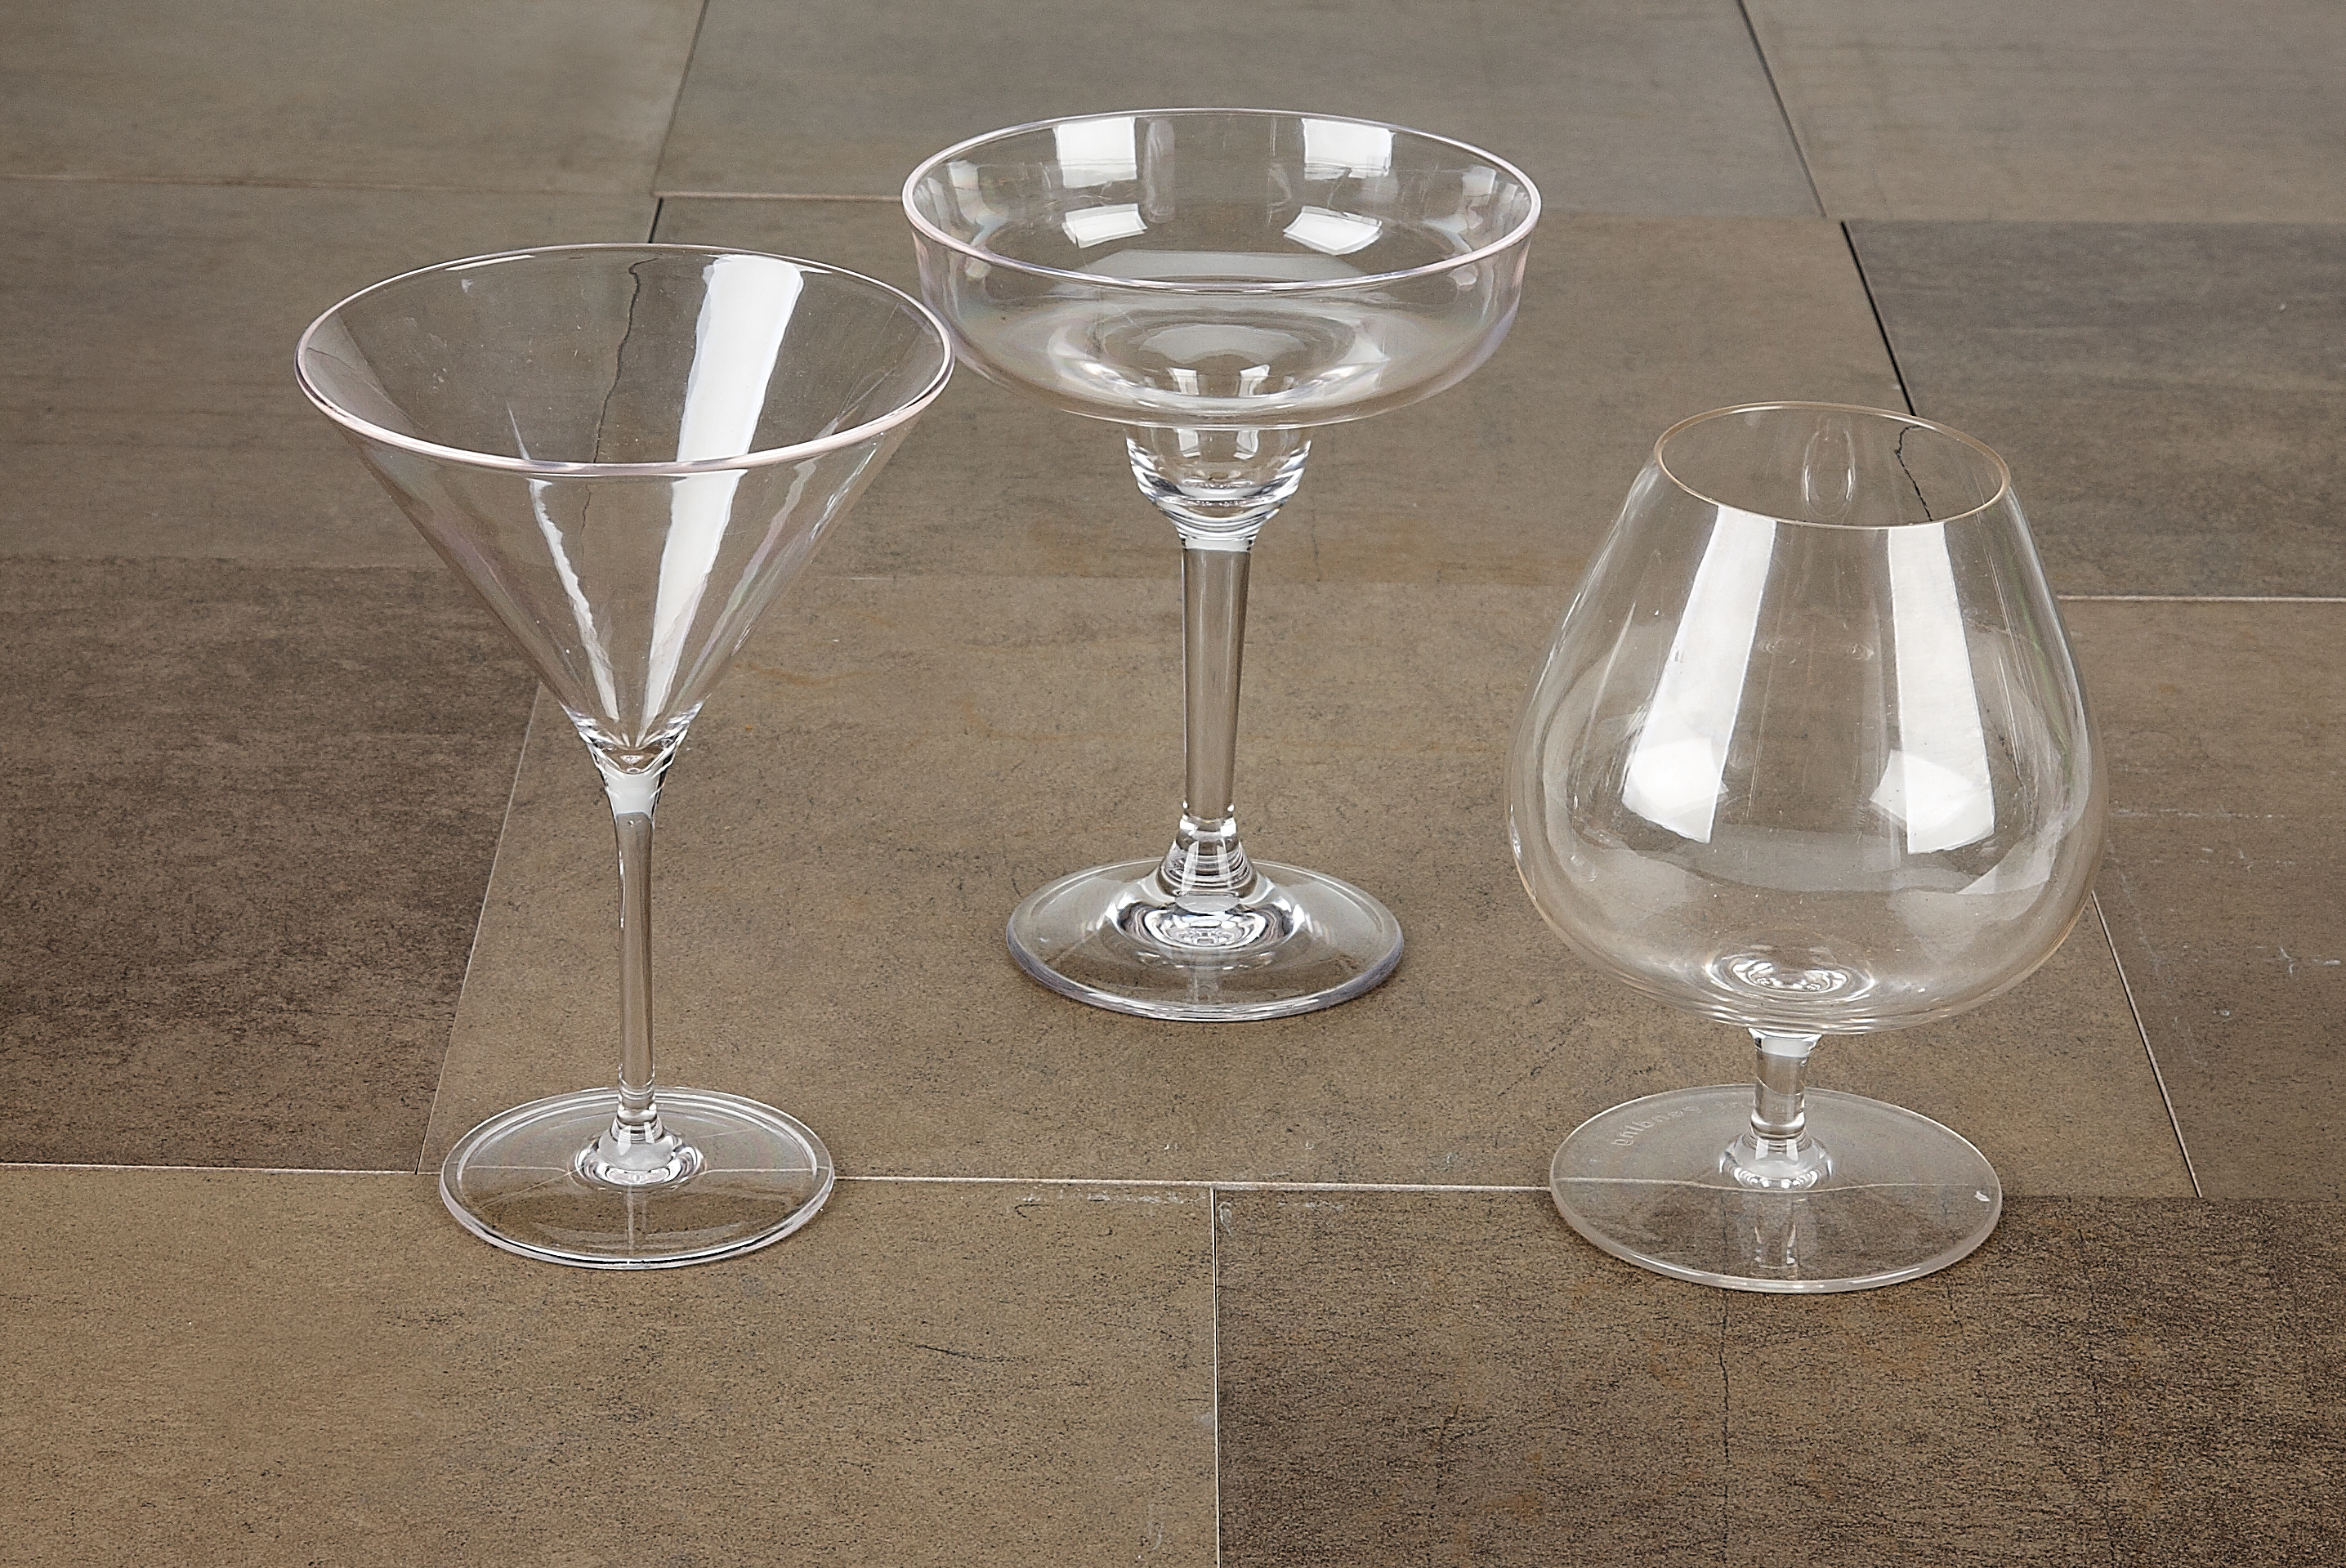 Capri Pina Colada Clear (6716) Polycarbonate Unbreakable Tall Cocktail Glass